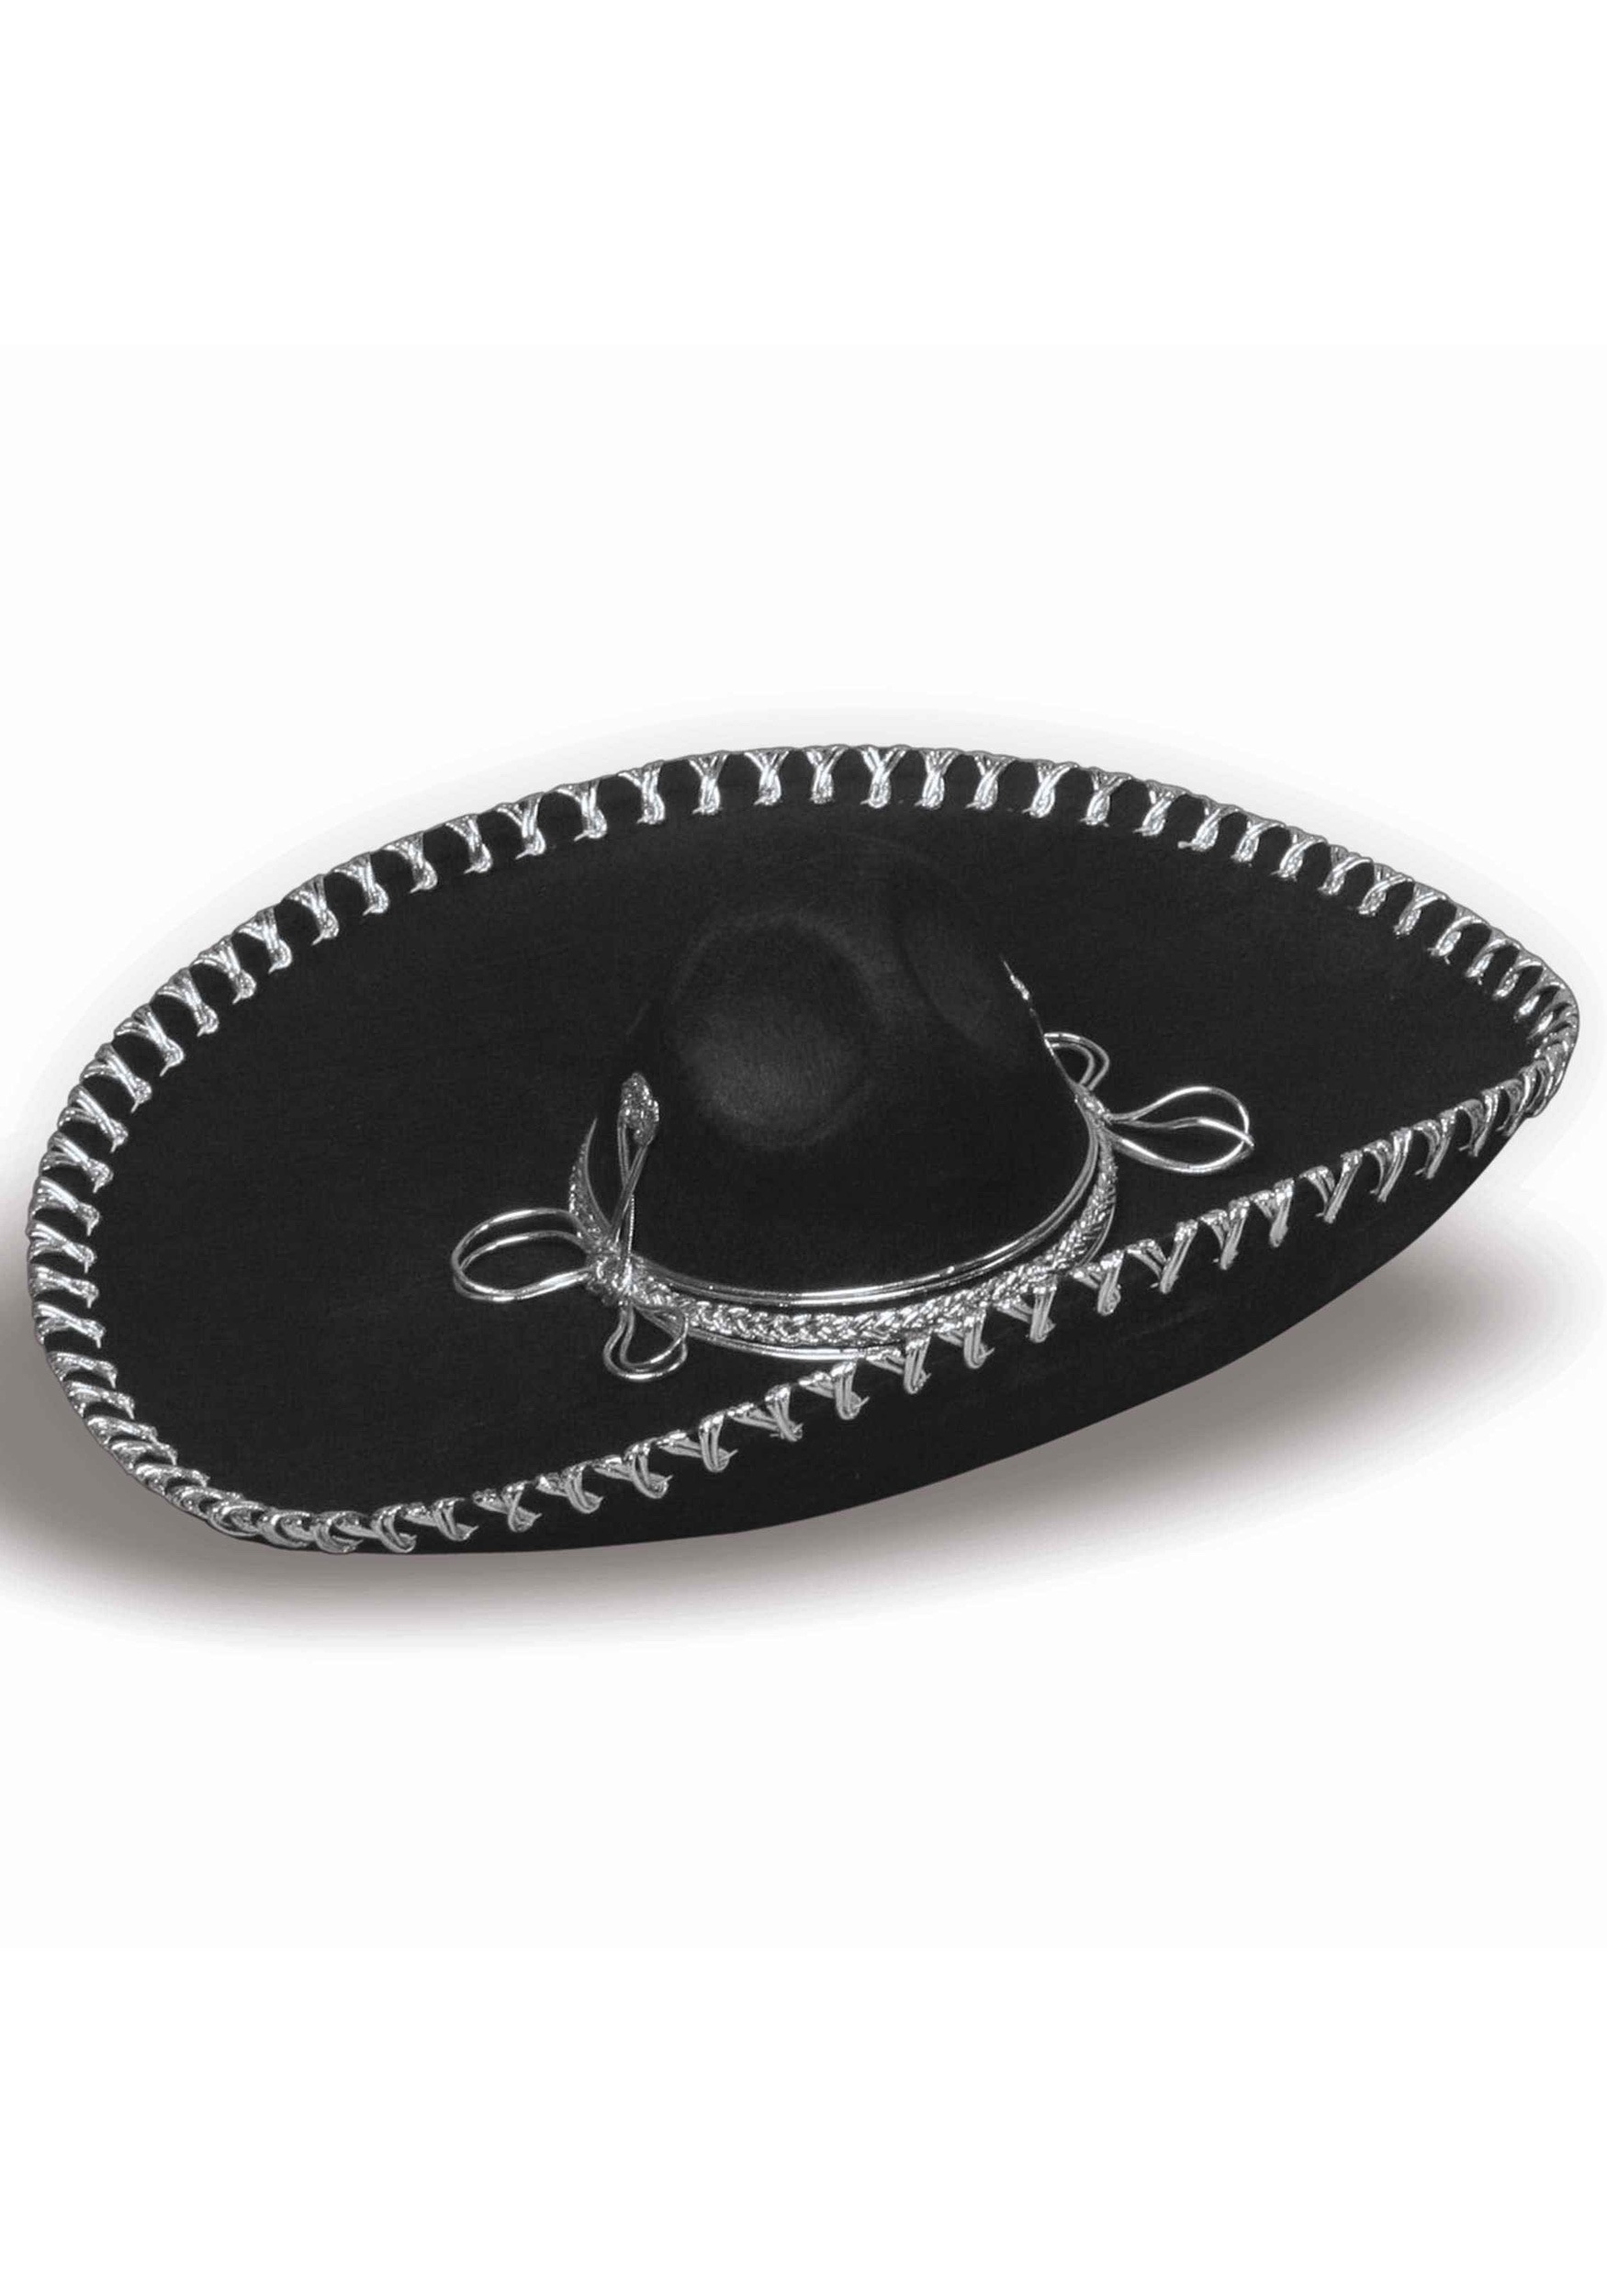 JUMBO LARGE BLACK MEXICAN MARIACHI SOMBRERO HALLOWEEN DAY OF THE DEAD HAT 